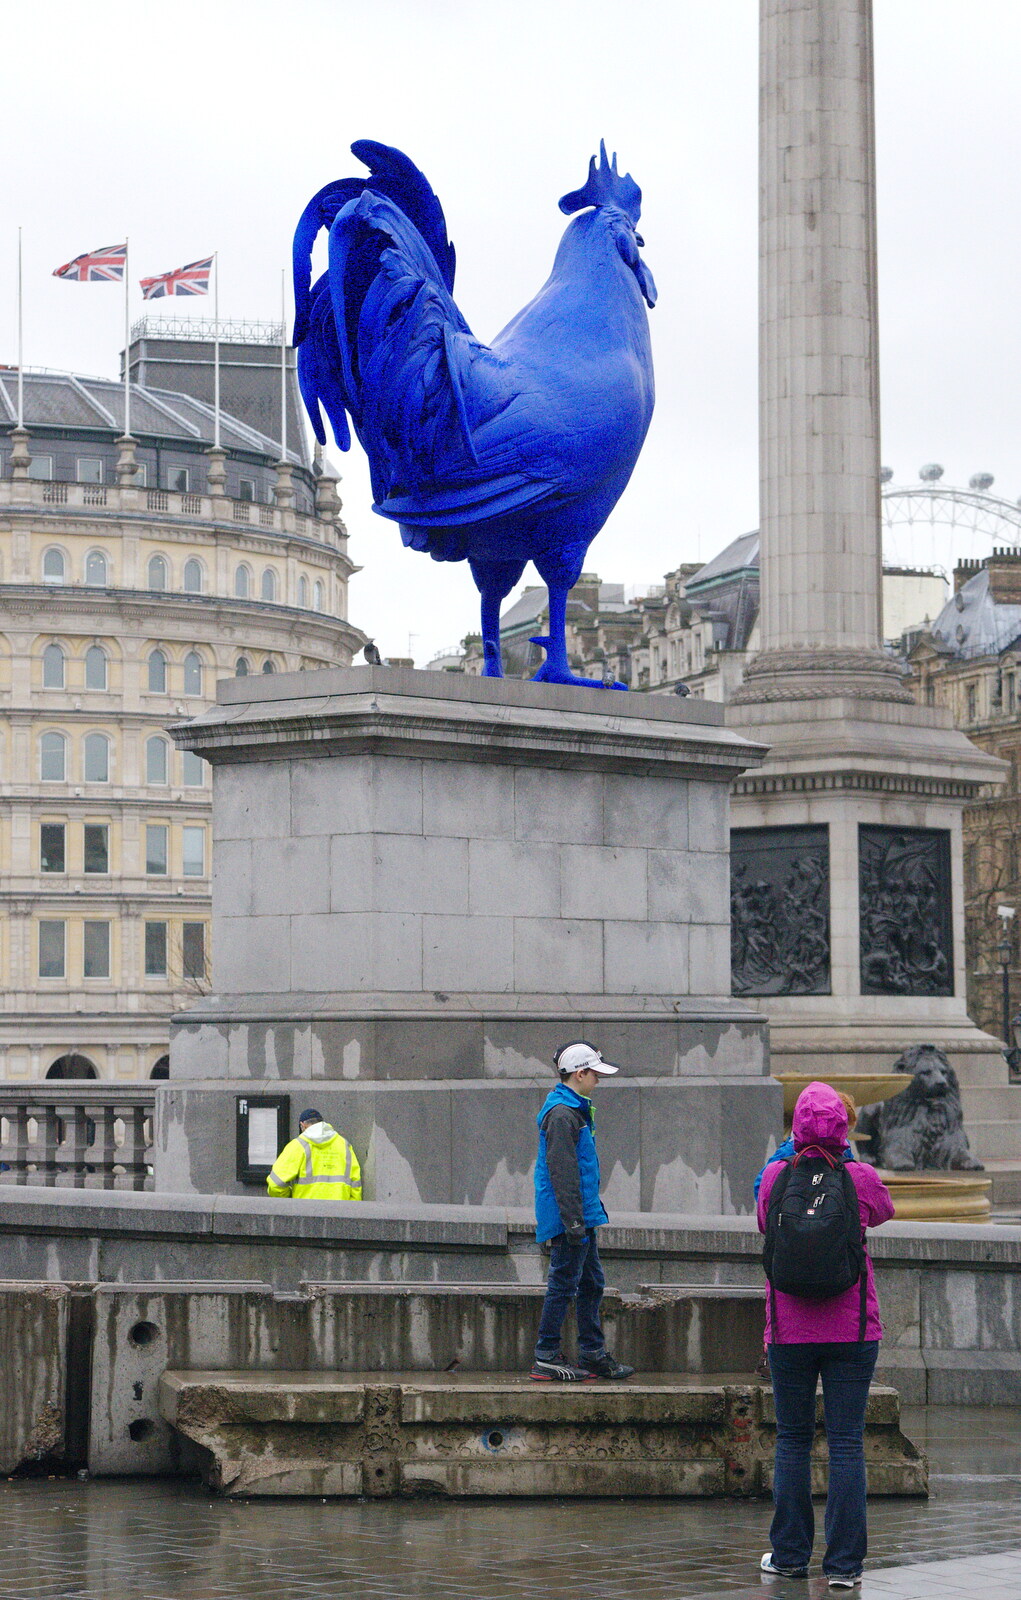 The French cockerel in Trafalgar Square from SwiftKey Innovation, The Hub, Westminster, London - 21st February 2014